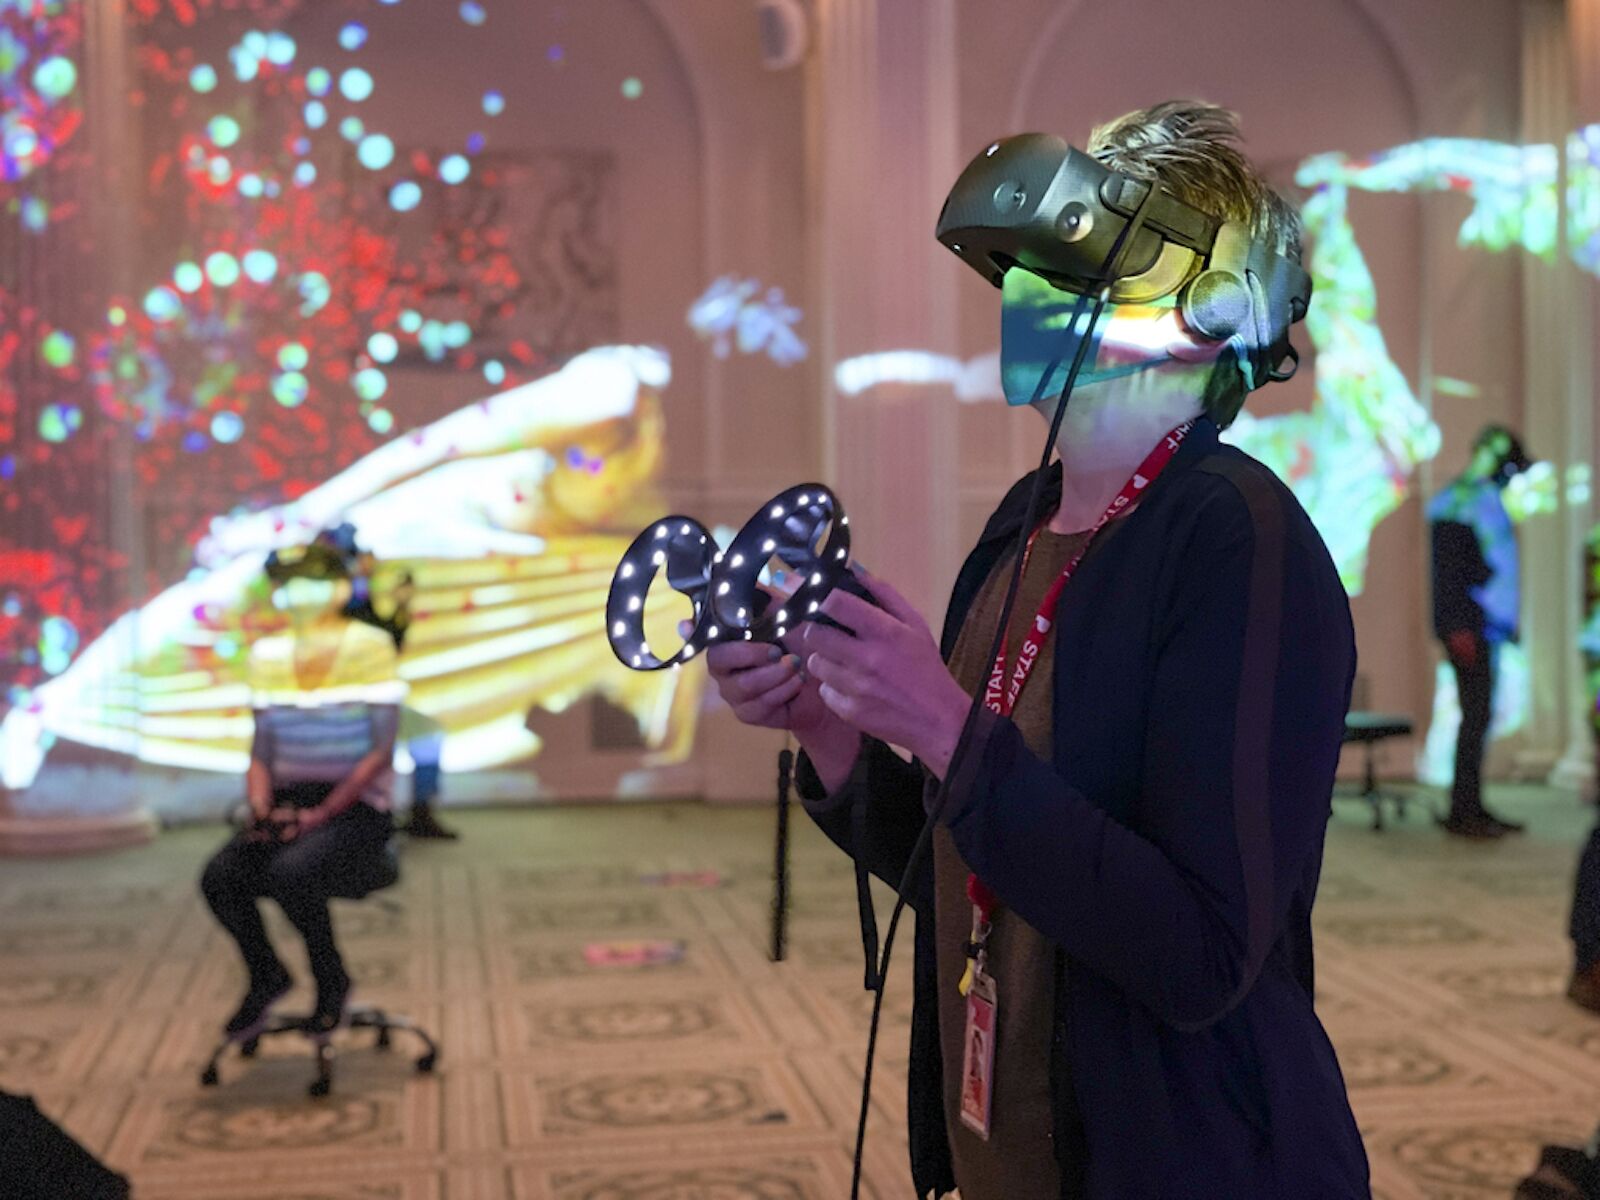 VR experience at the Portland Art Museum